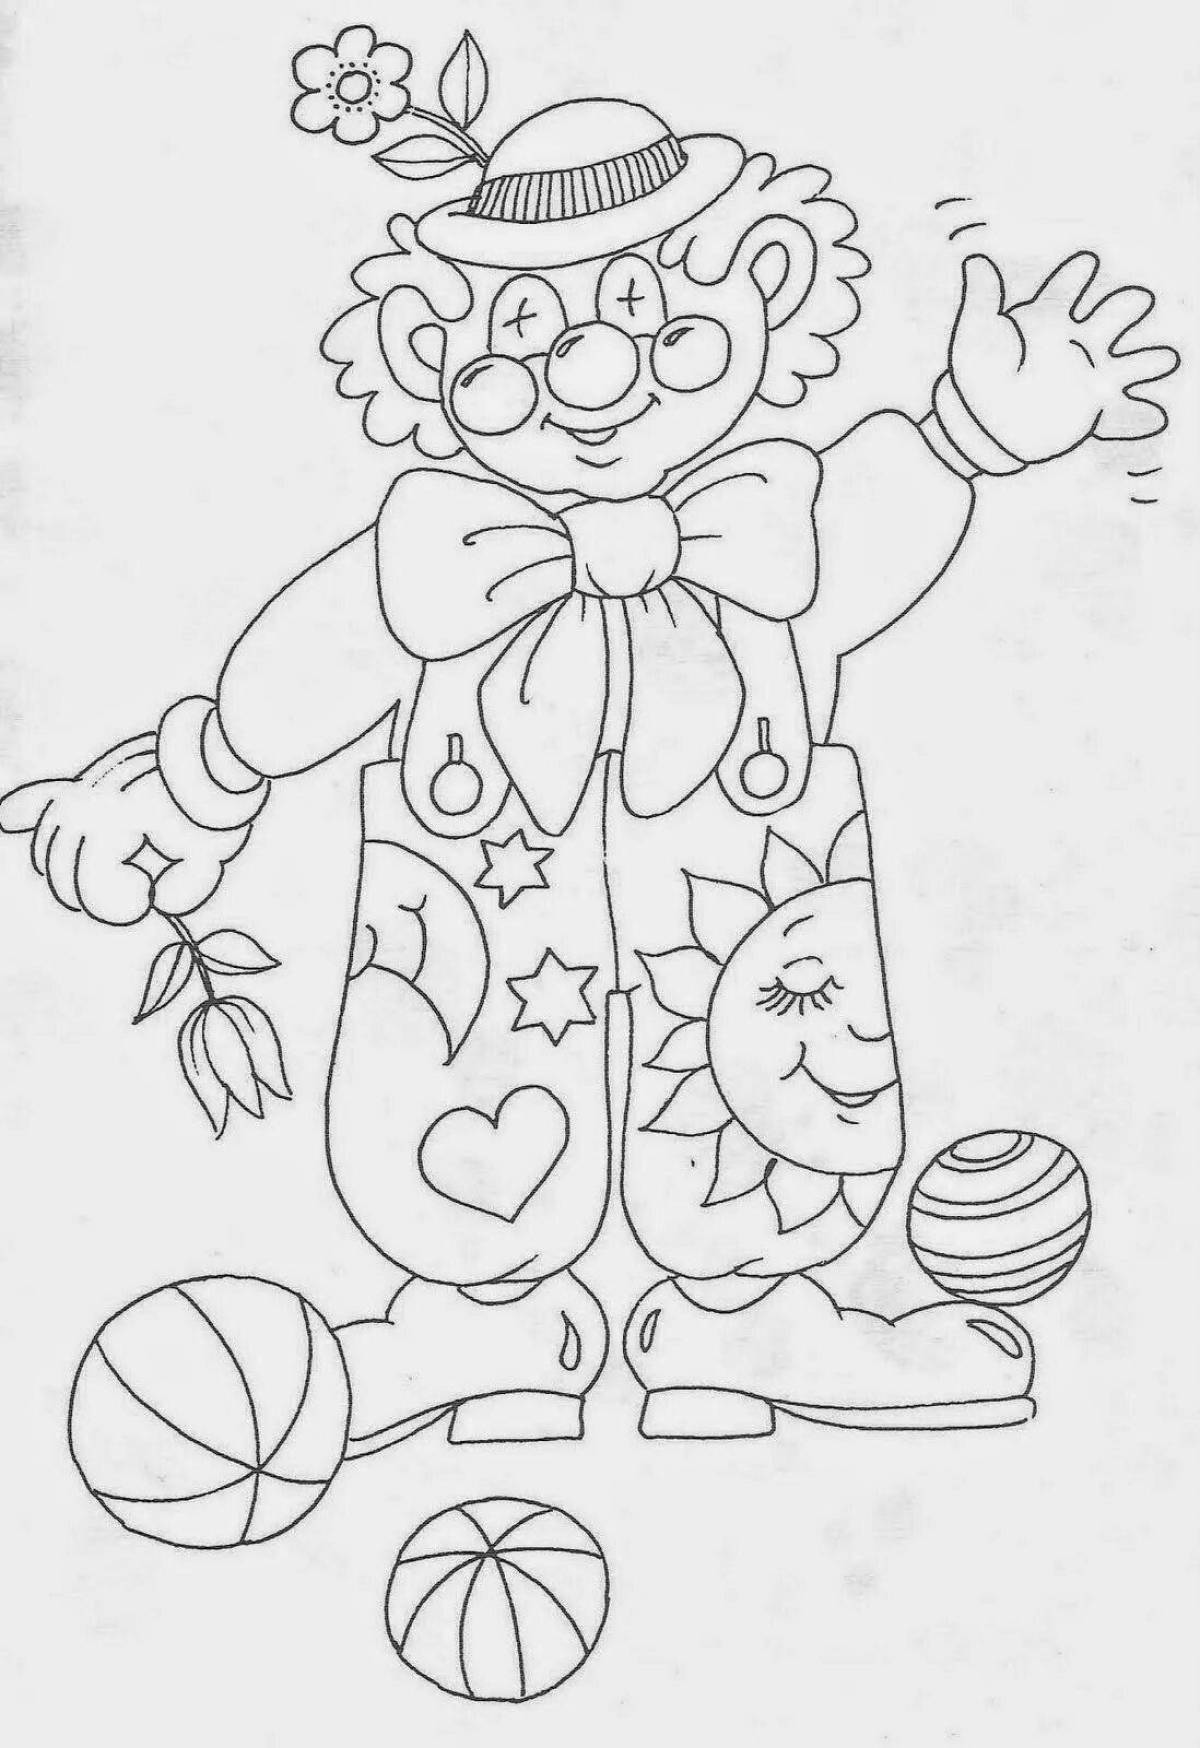 Fun drawing of a clown for kids